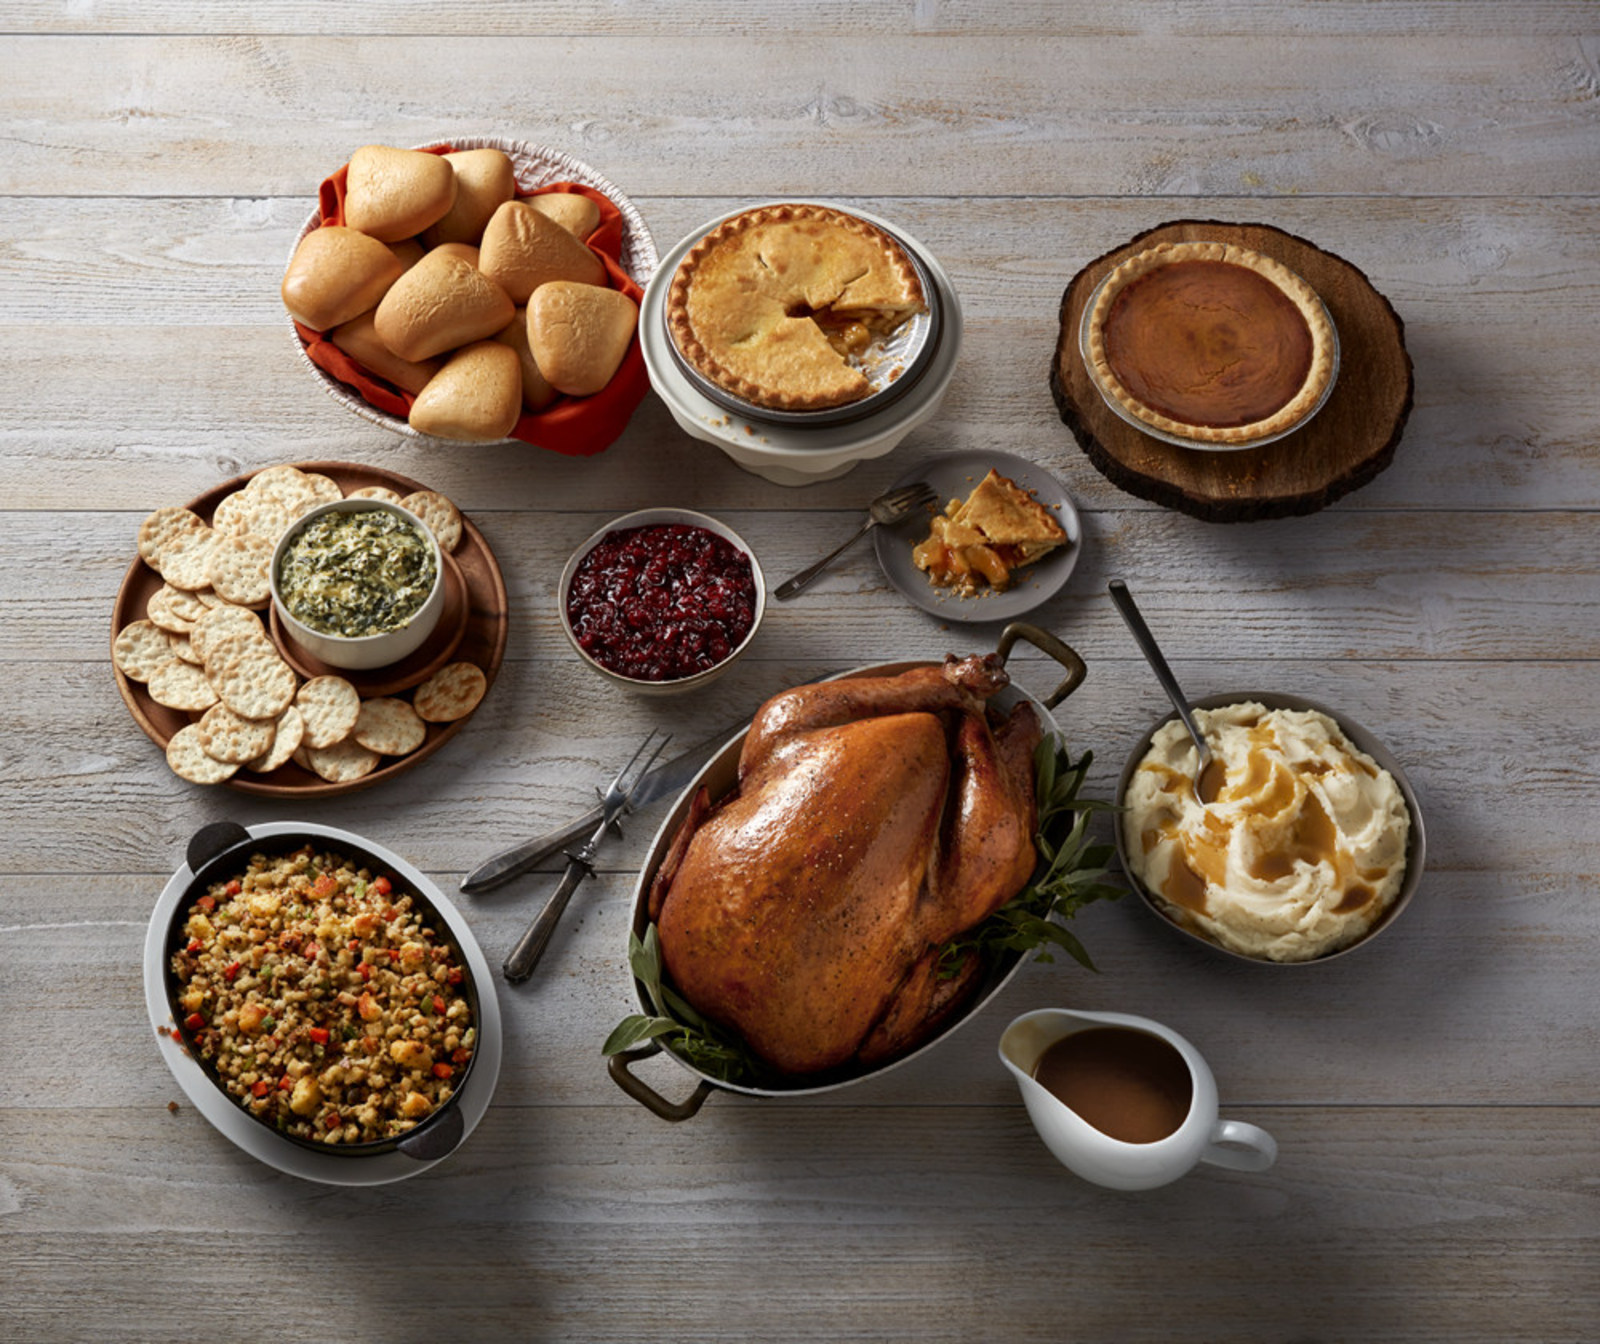 Boston Market Aims To Make This Thanksgiving The Easiest And Most ...